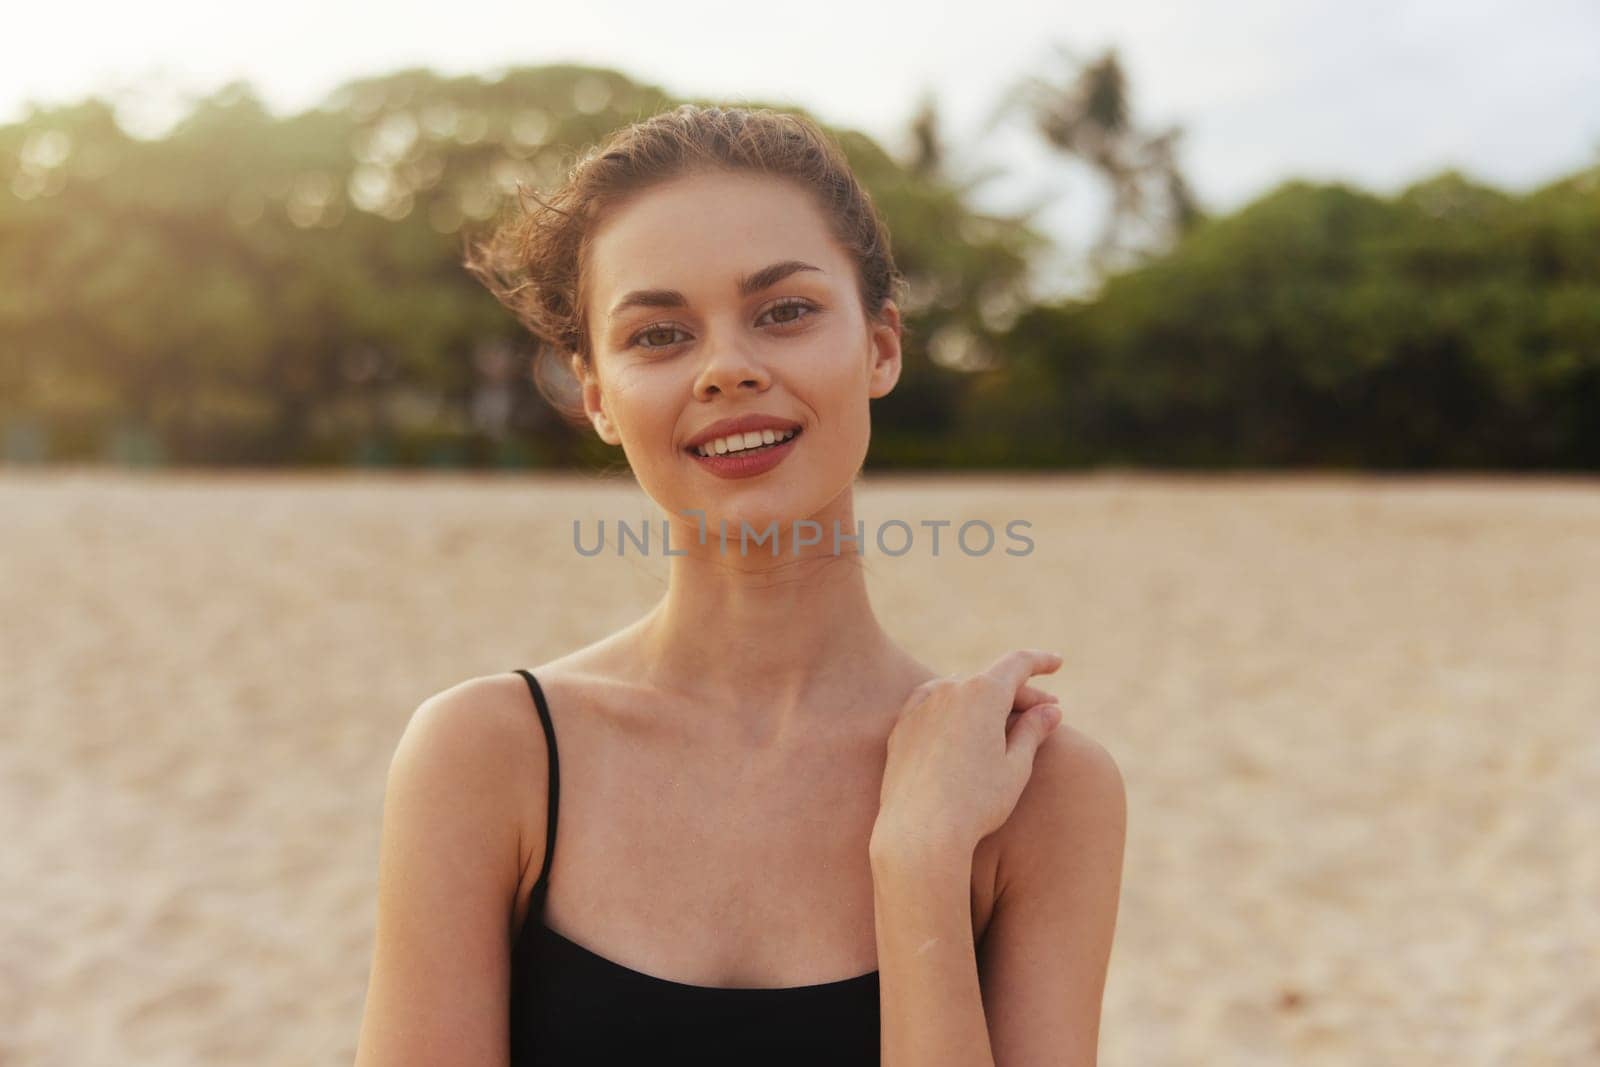 woman ocean enjoyment sand young sunlight dress sea running water happy beauty sunset vacation peaceful freedom smile coast lifestyle summer beach